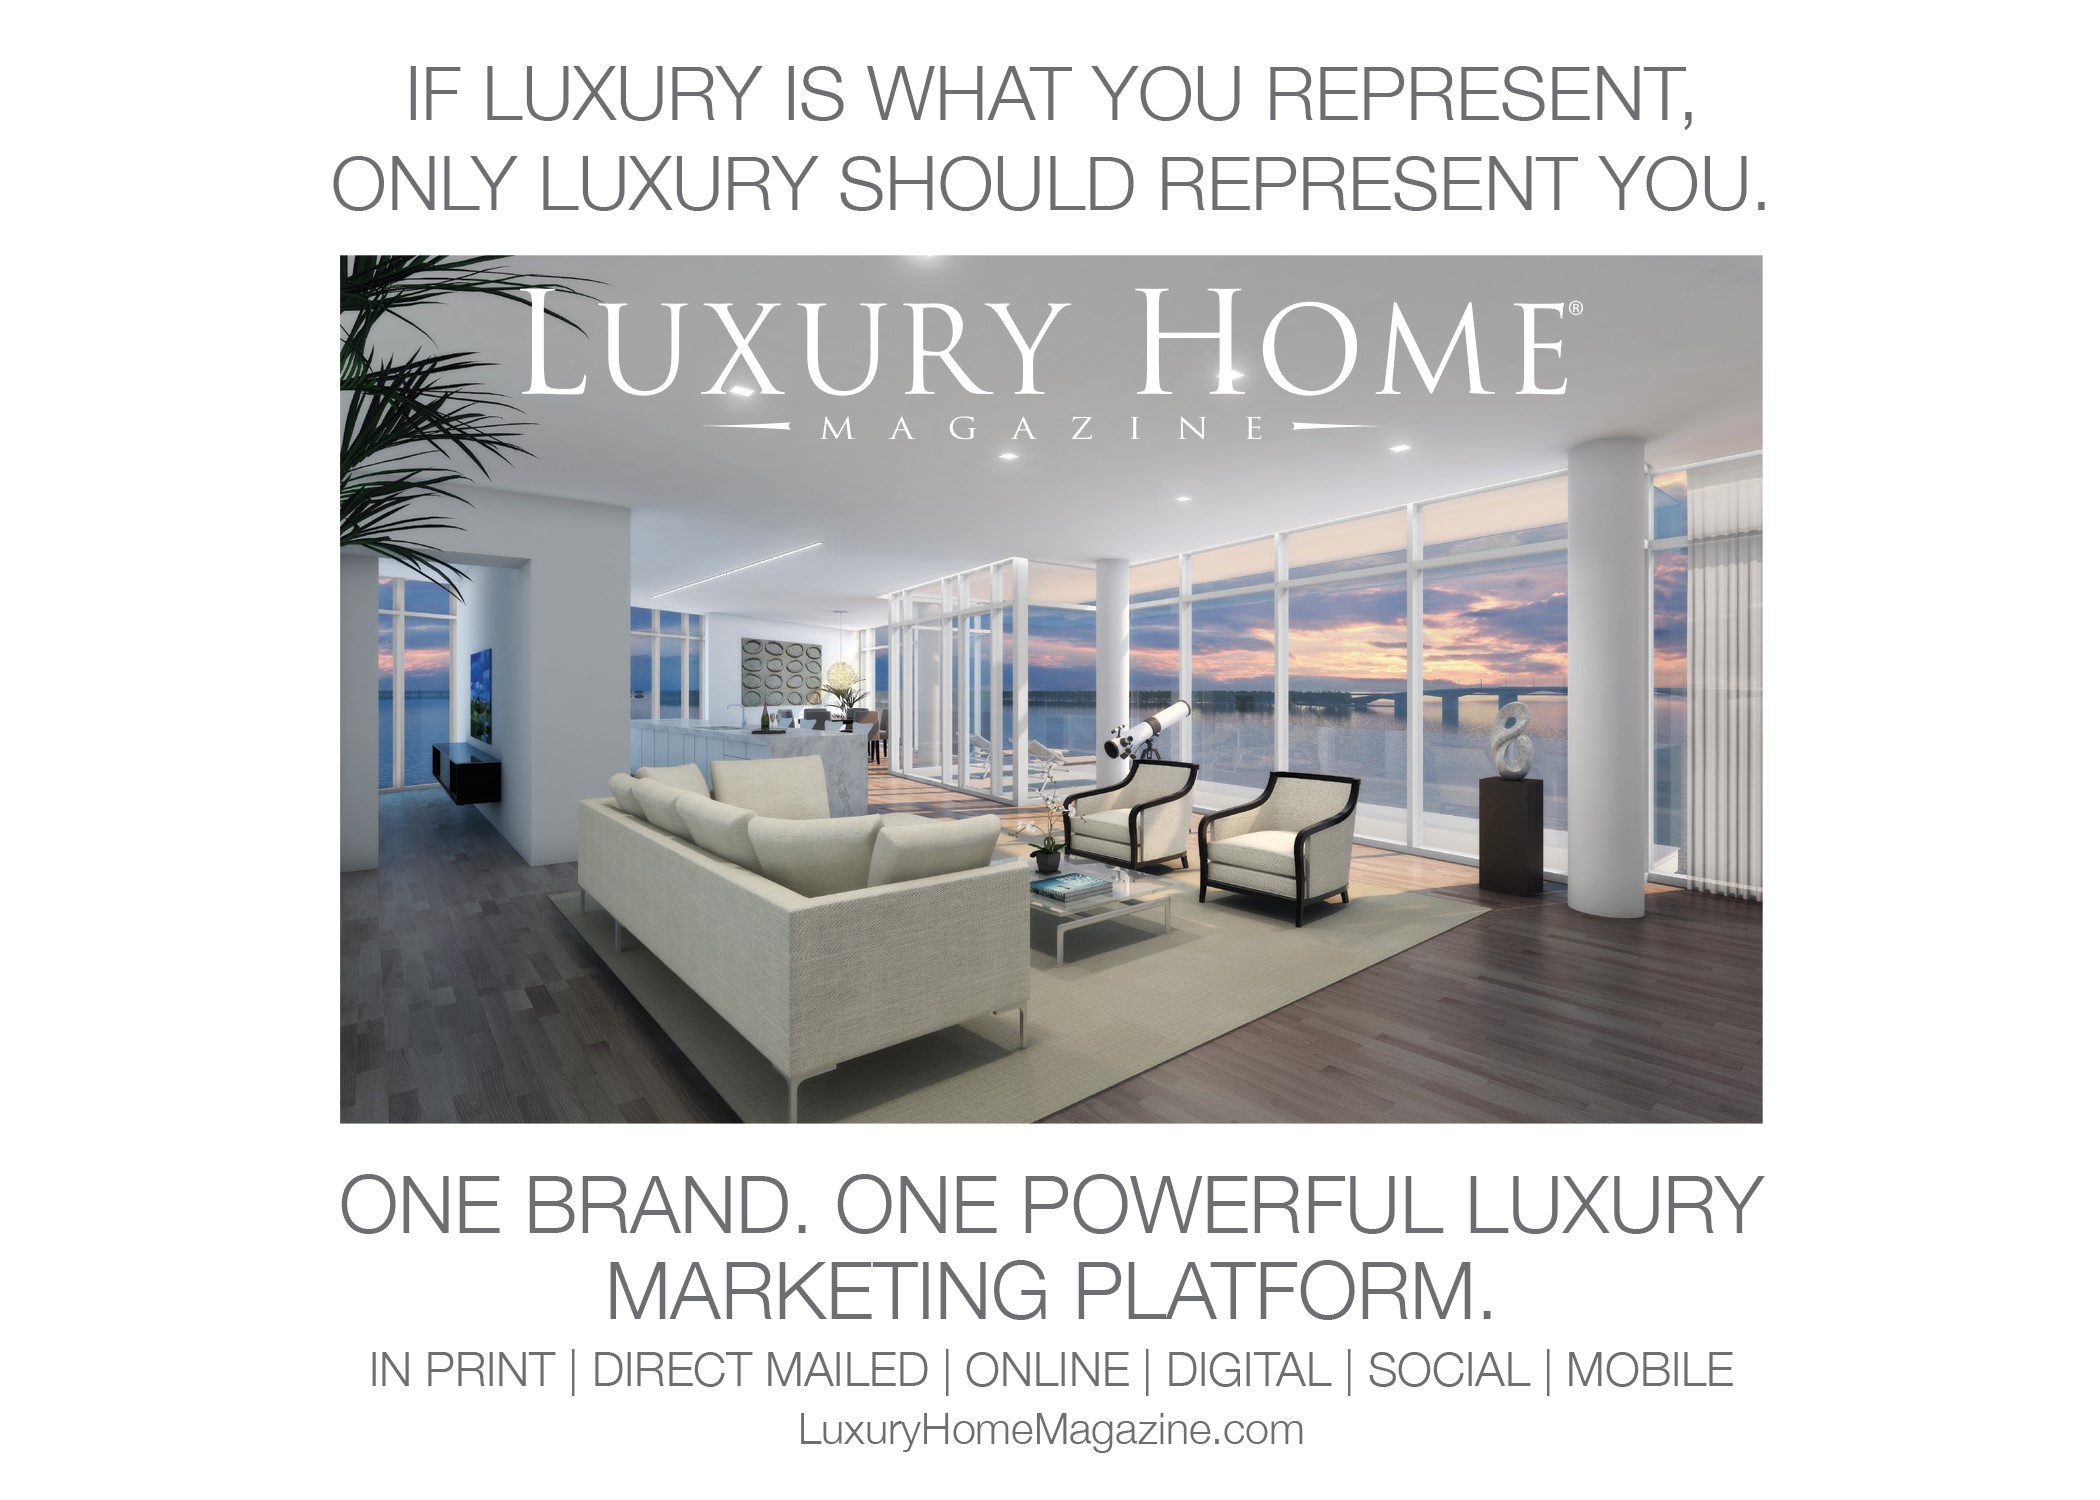 If Luxury is what you represent, Only luxury should represent you.